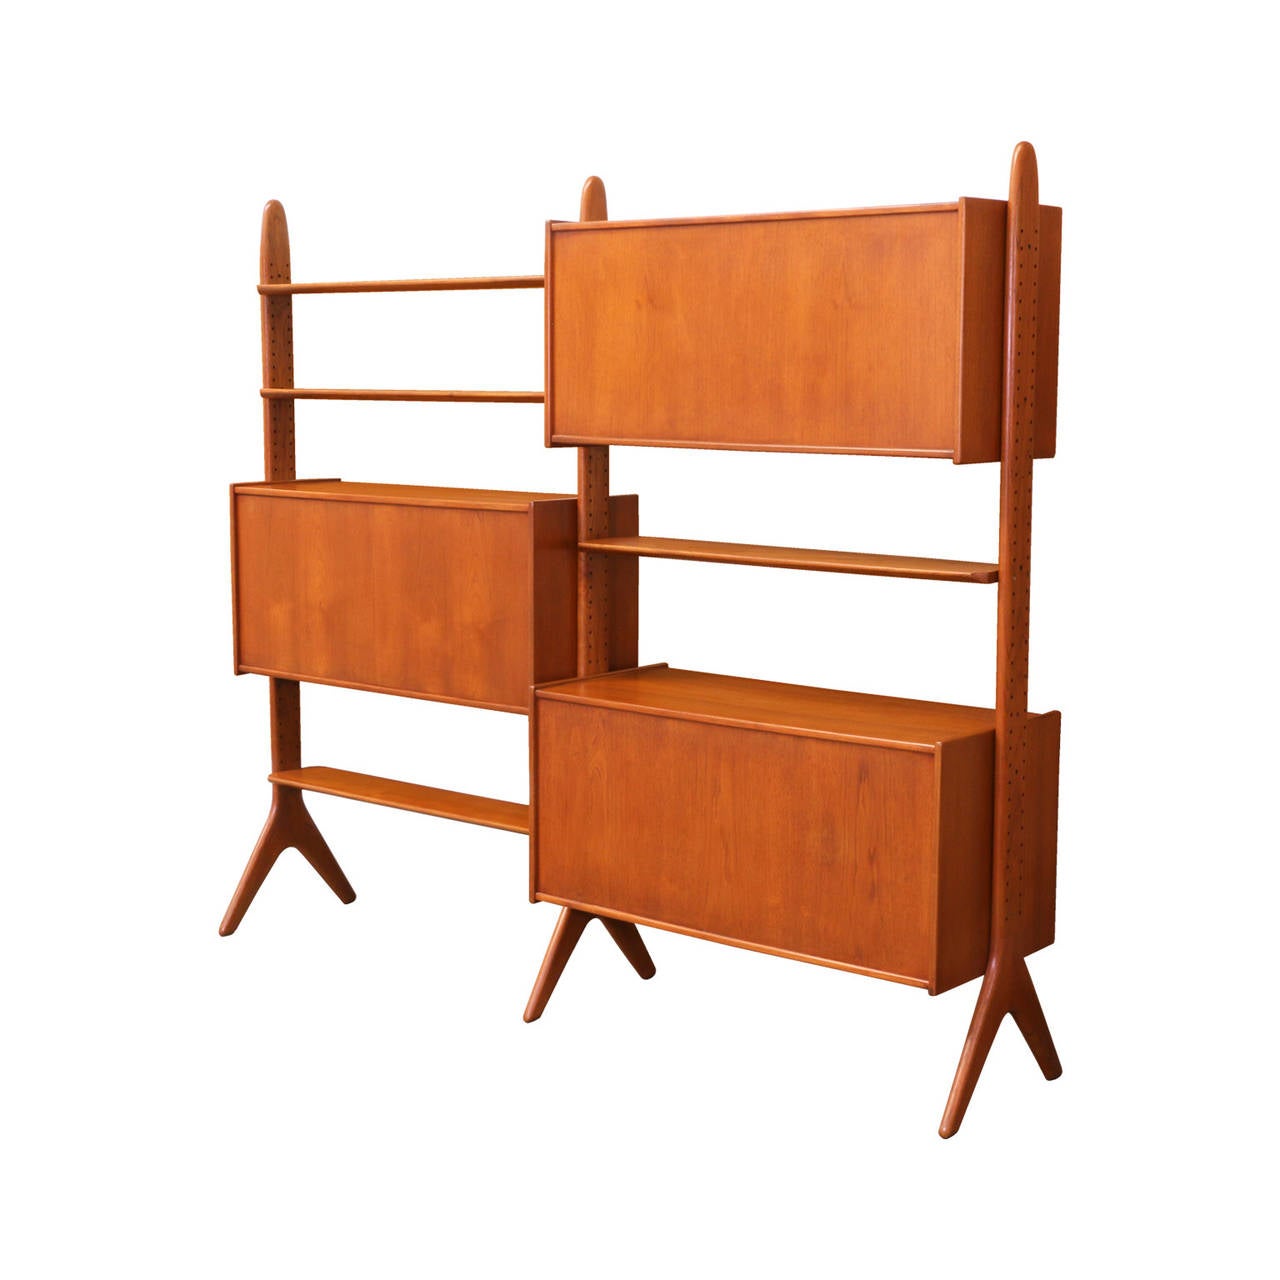 Designer: Unknown.
Manufacturer: Unknown.
Period/Style: Danish modern.
Country: Denmark.
Date: 1960s.

Dimensions: 71″ H x 81.5″ L x 17″ W.
Materials: Teak, glass.
Condition: Excellent, newly refinished.
Number of items: One.
ID number: